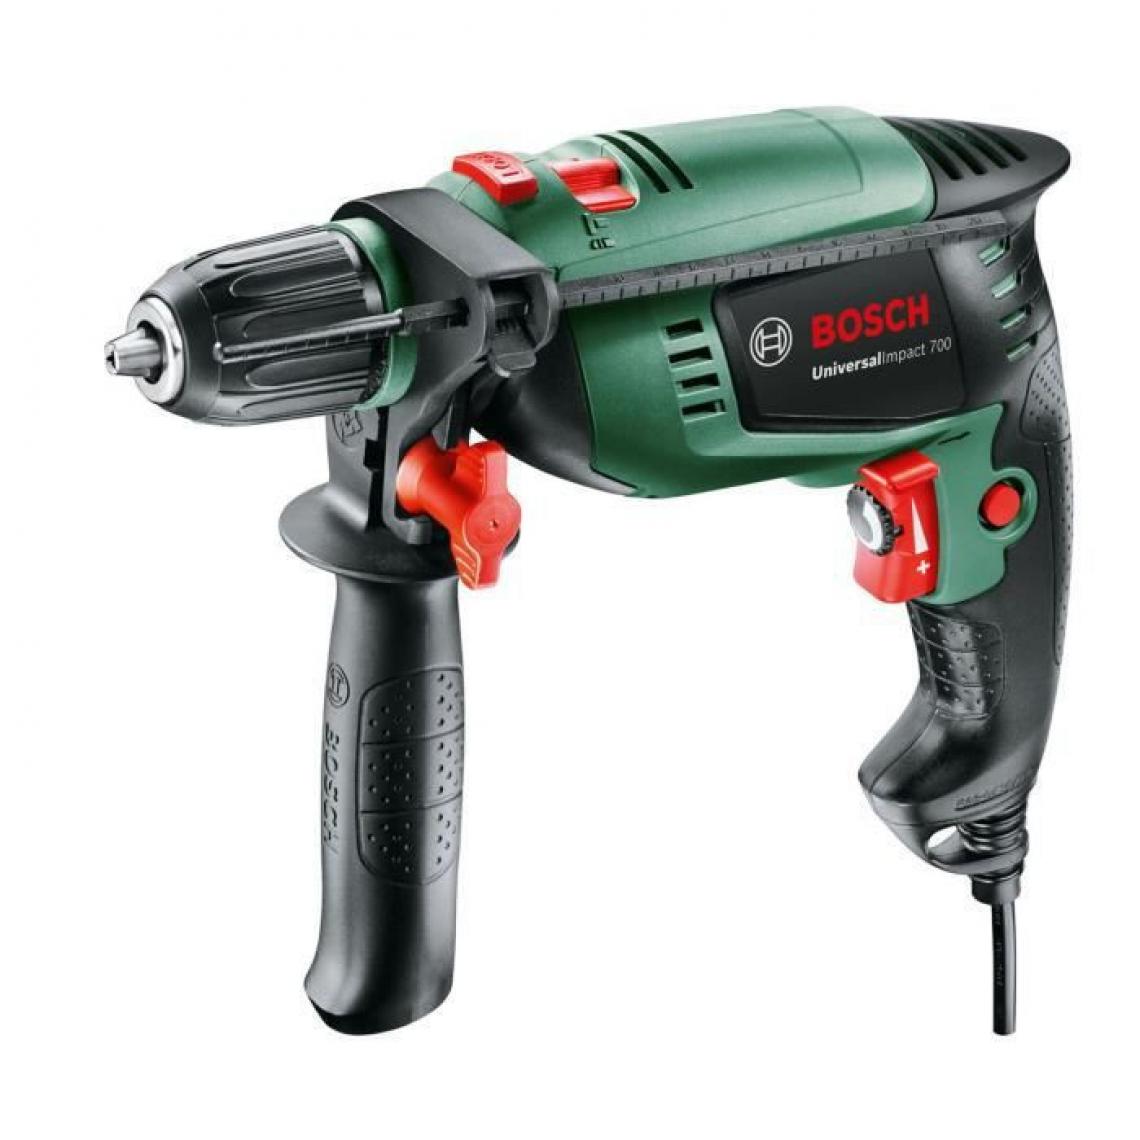 Bosch - Perceuse a percussion BOSCH UniversalImpact 700W - Perceuses, visseuses filaires